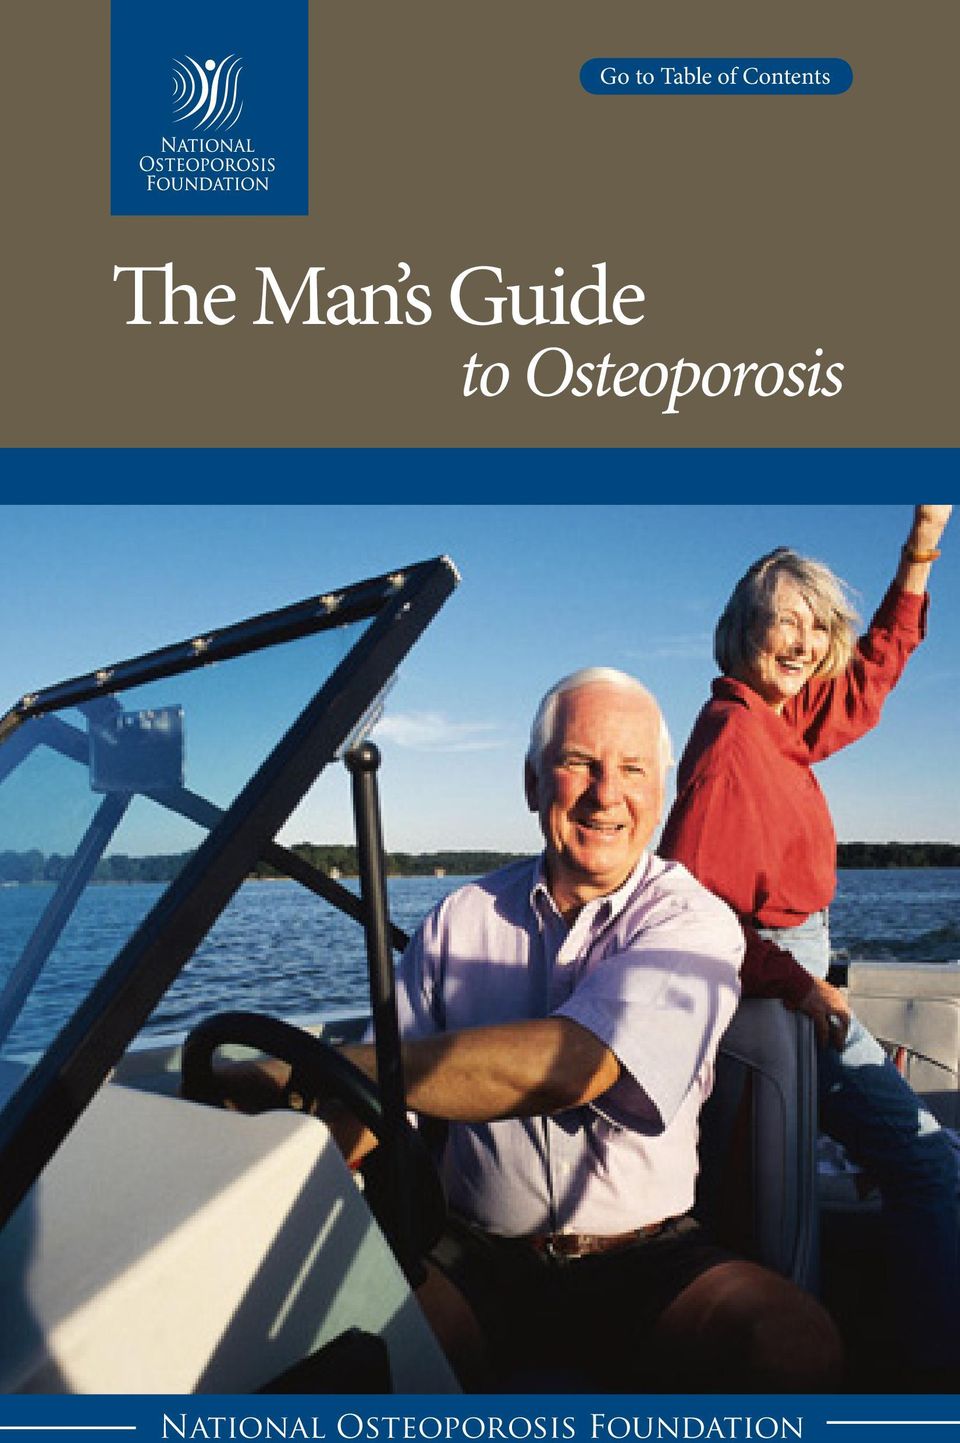 Guide to Osteoporosis